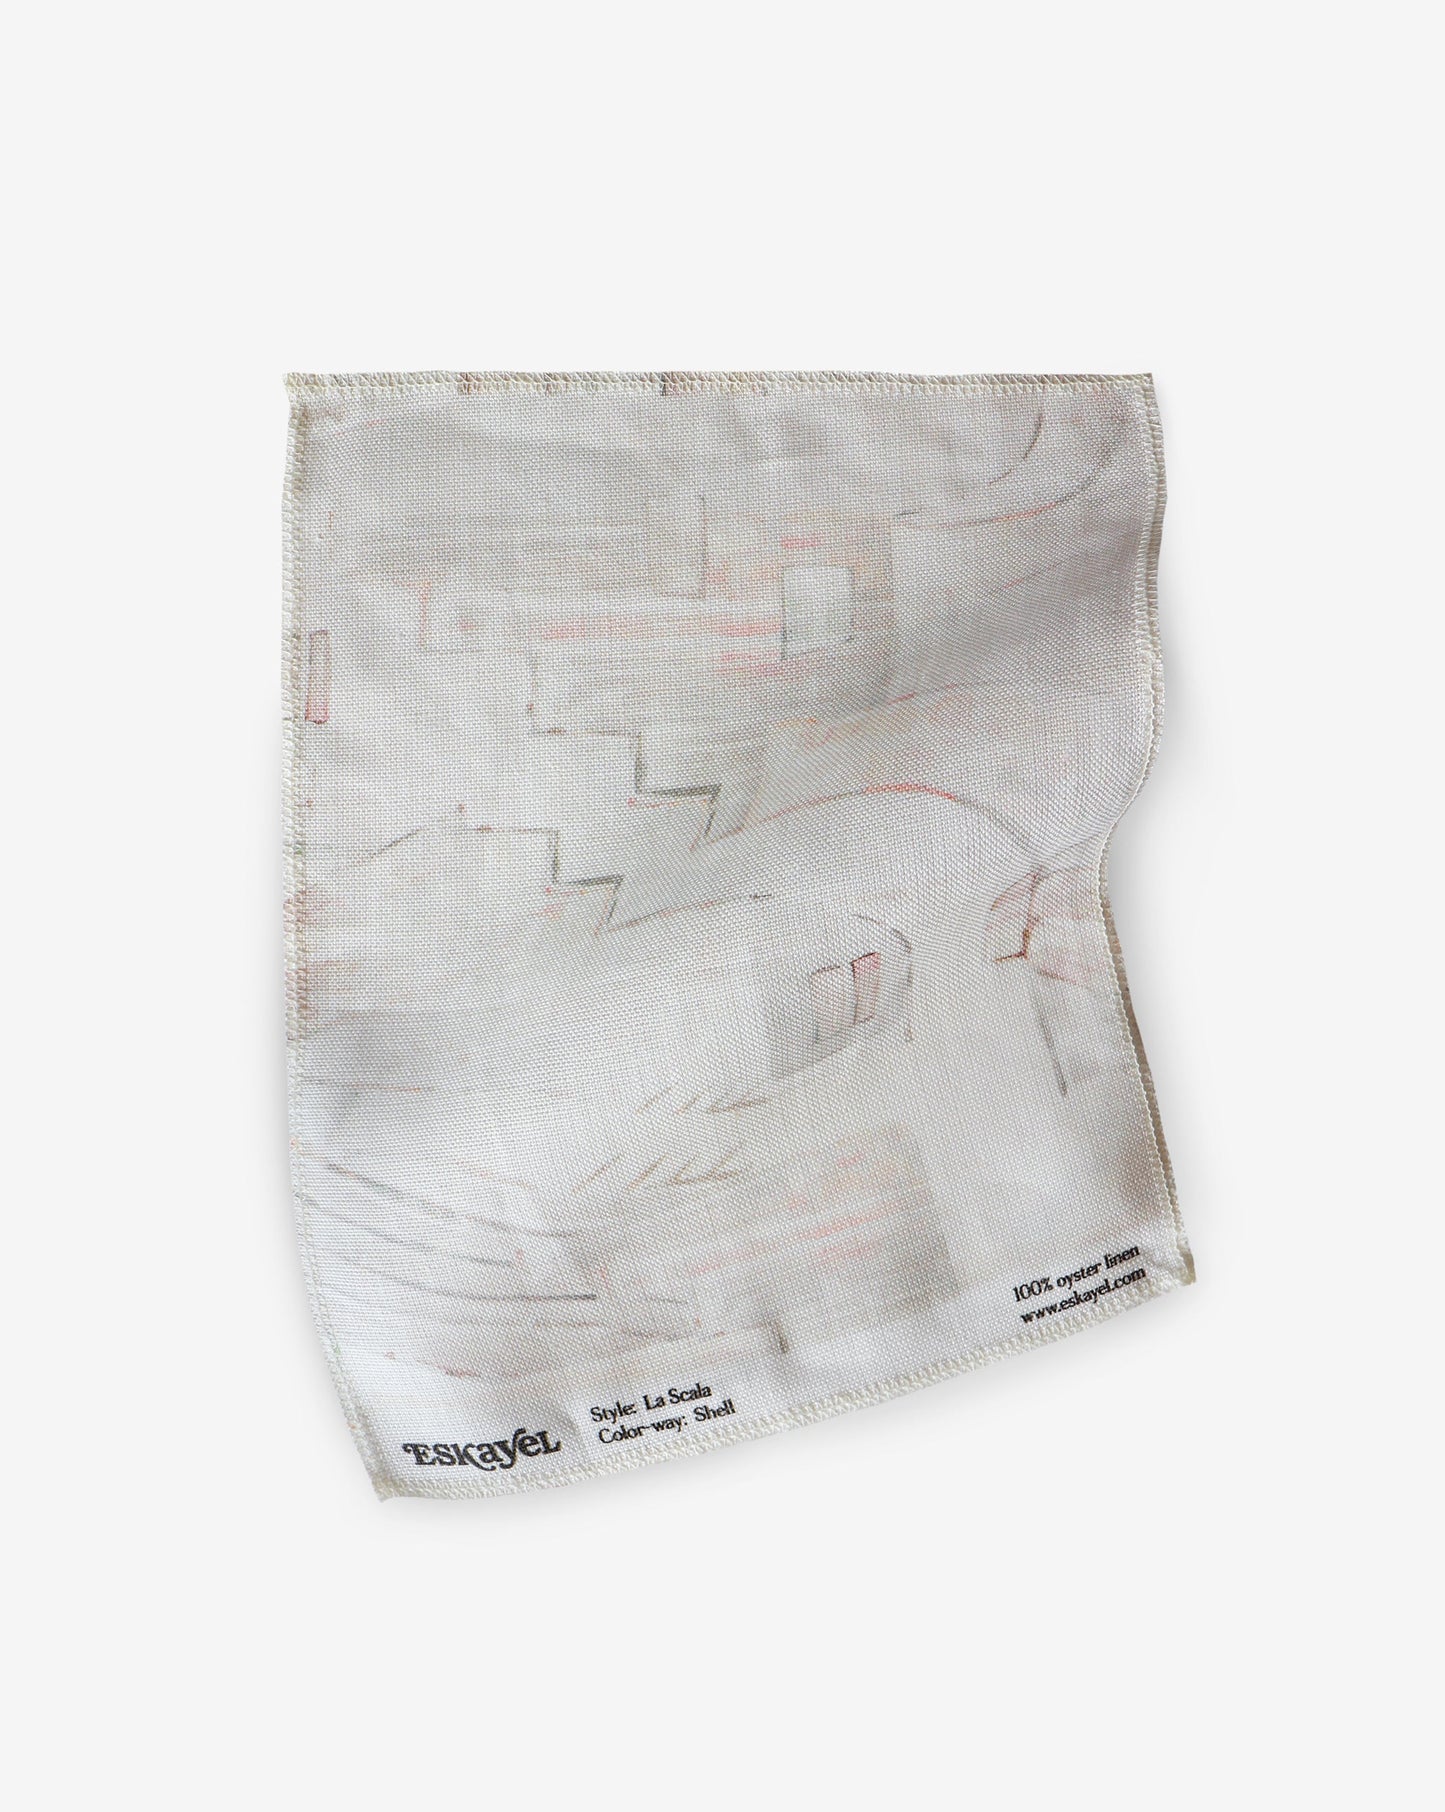 A La Scala Fabric Sample||Shell with a map on it can be ordered as a sample.